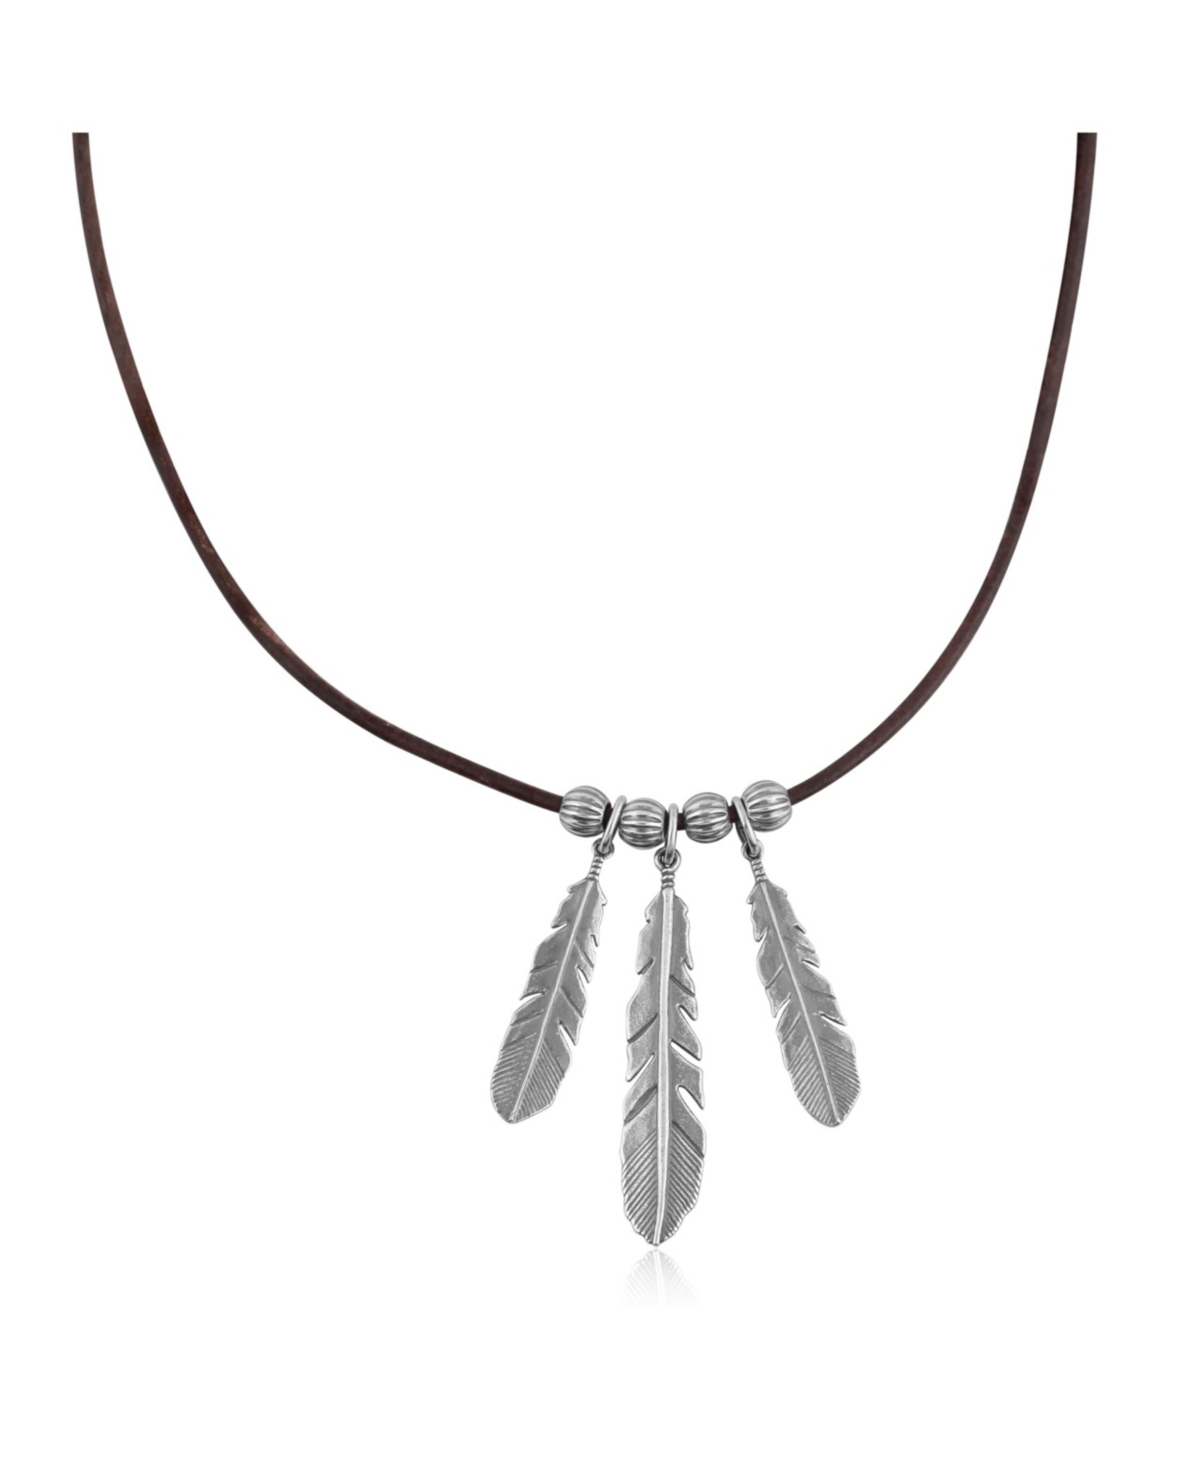 Sterling Silver Triple Feather and Leather Necklace, 17 Inches - Silver/brown leather